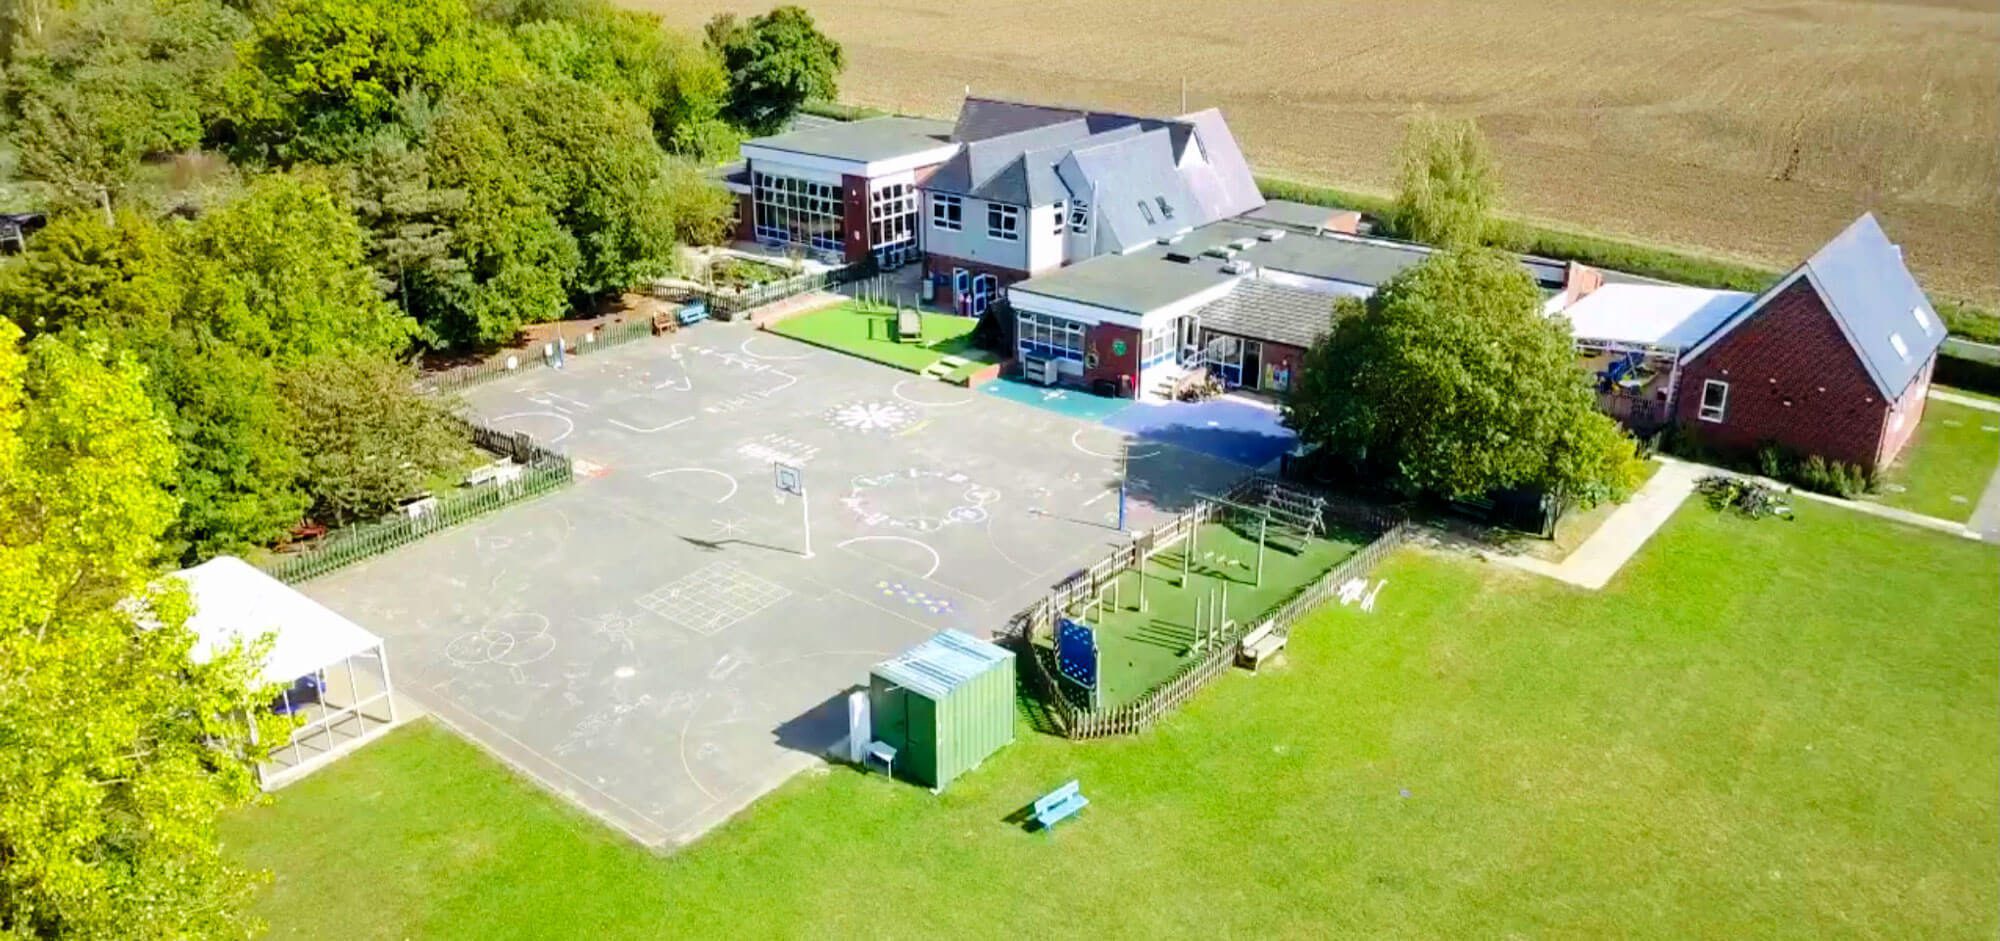 Great Easton Primary School arial view